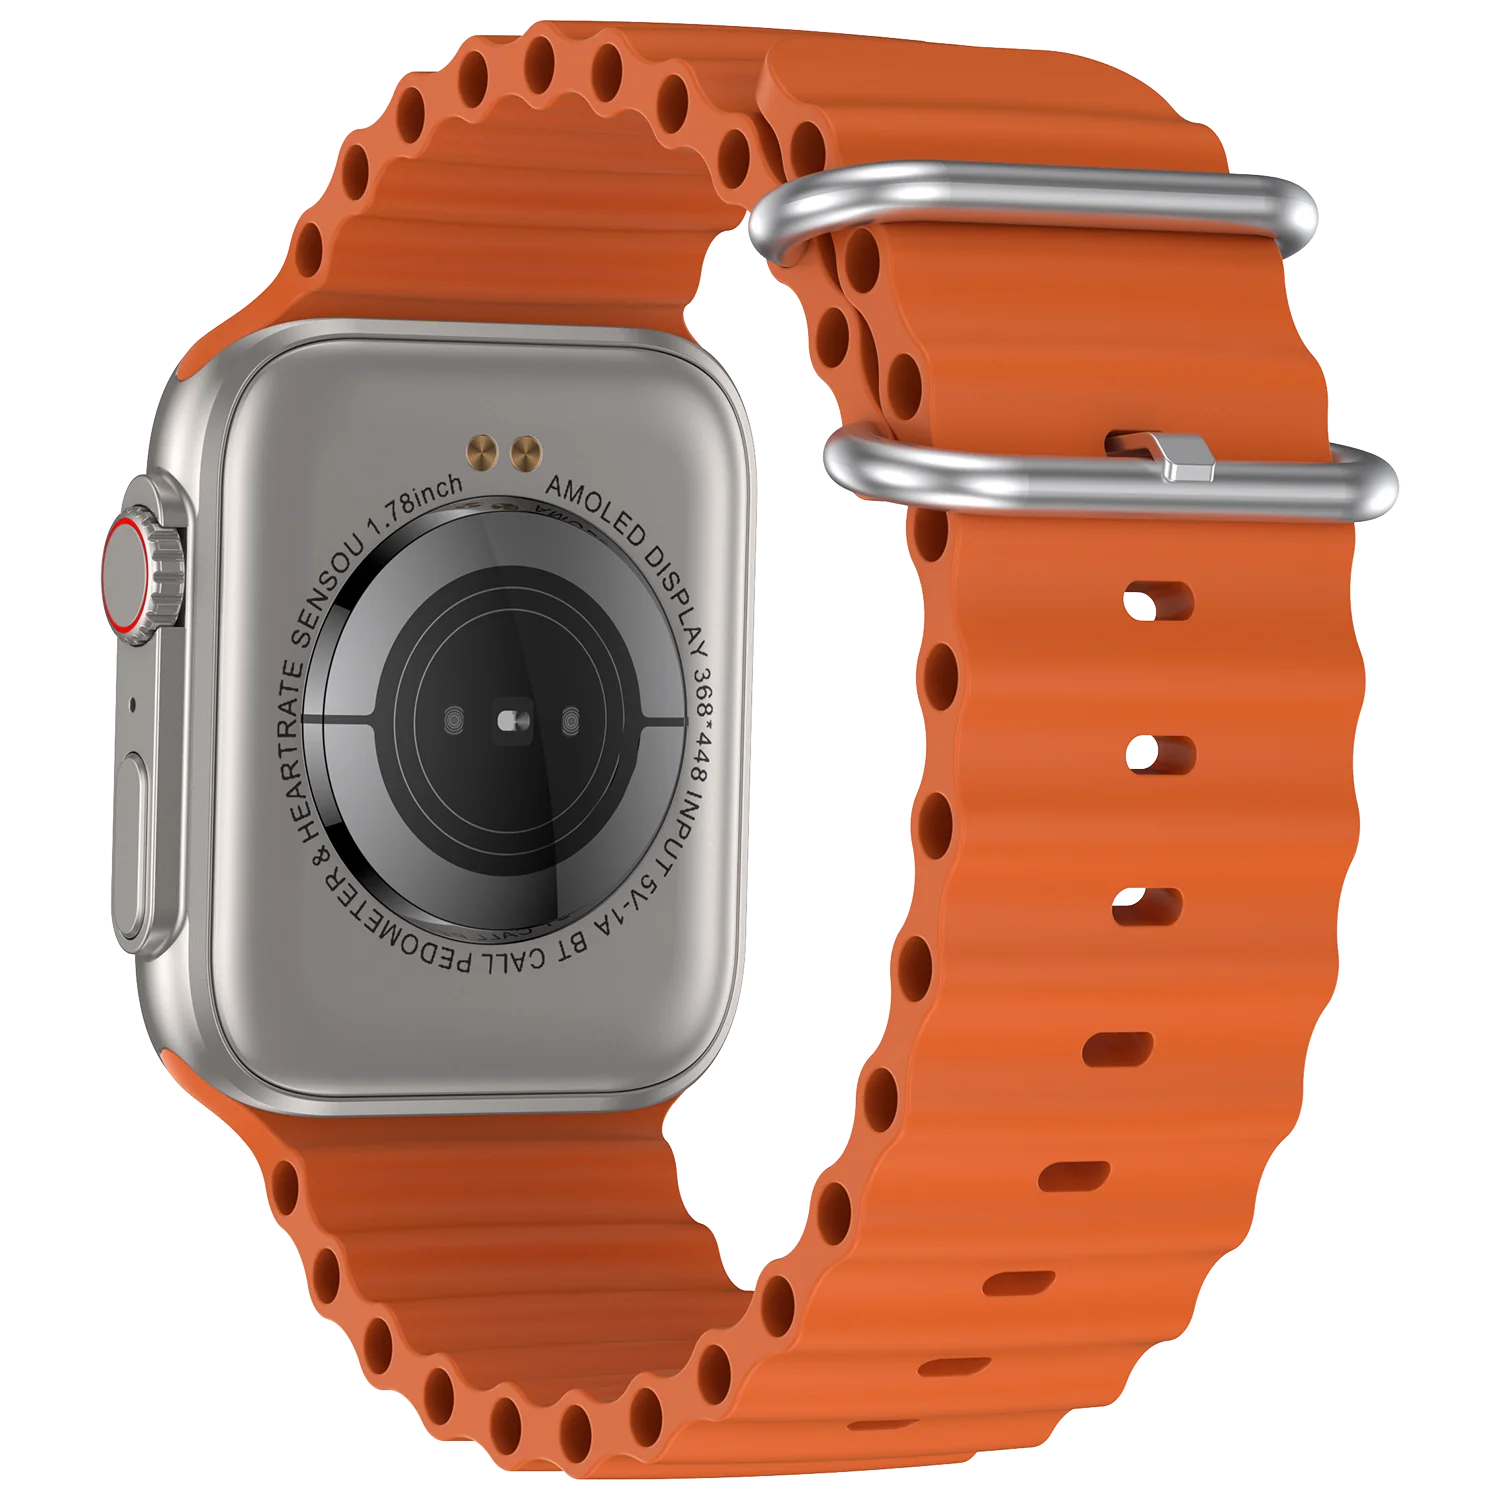 Fire-Boltt Edge Smartwatch with built-in Speaker and Microphone